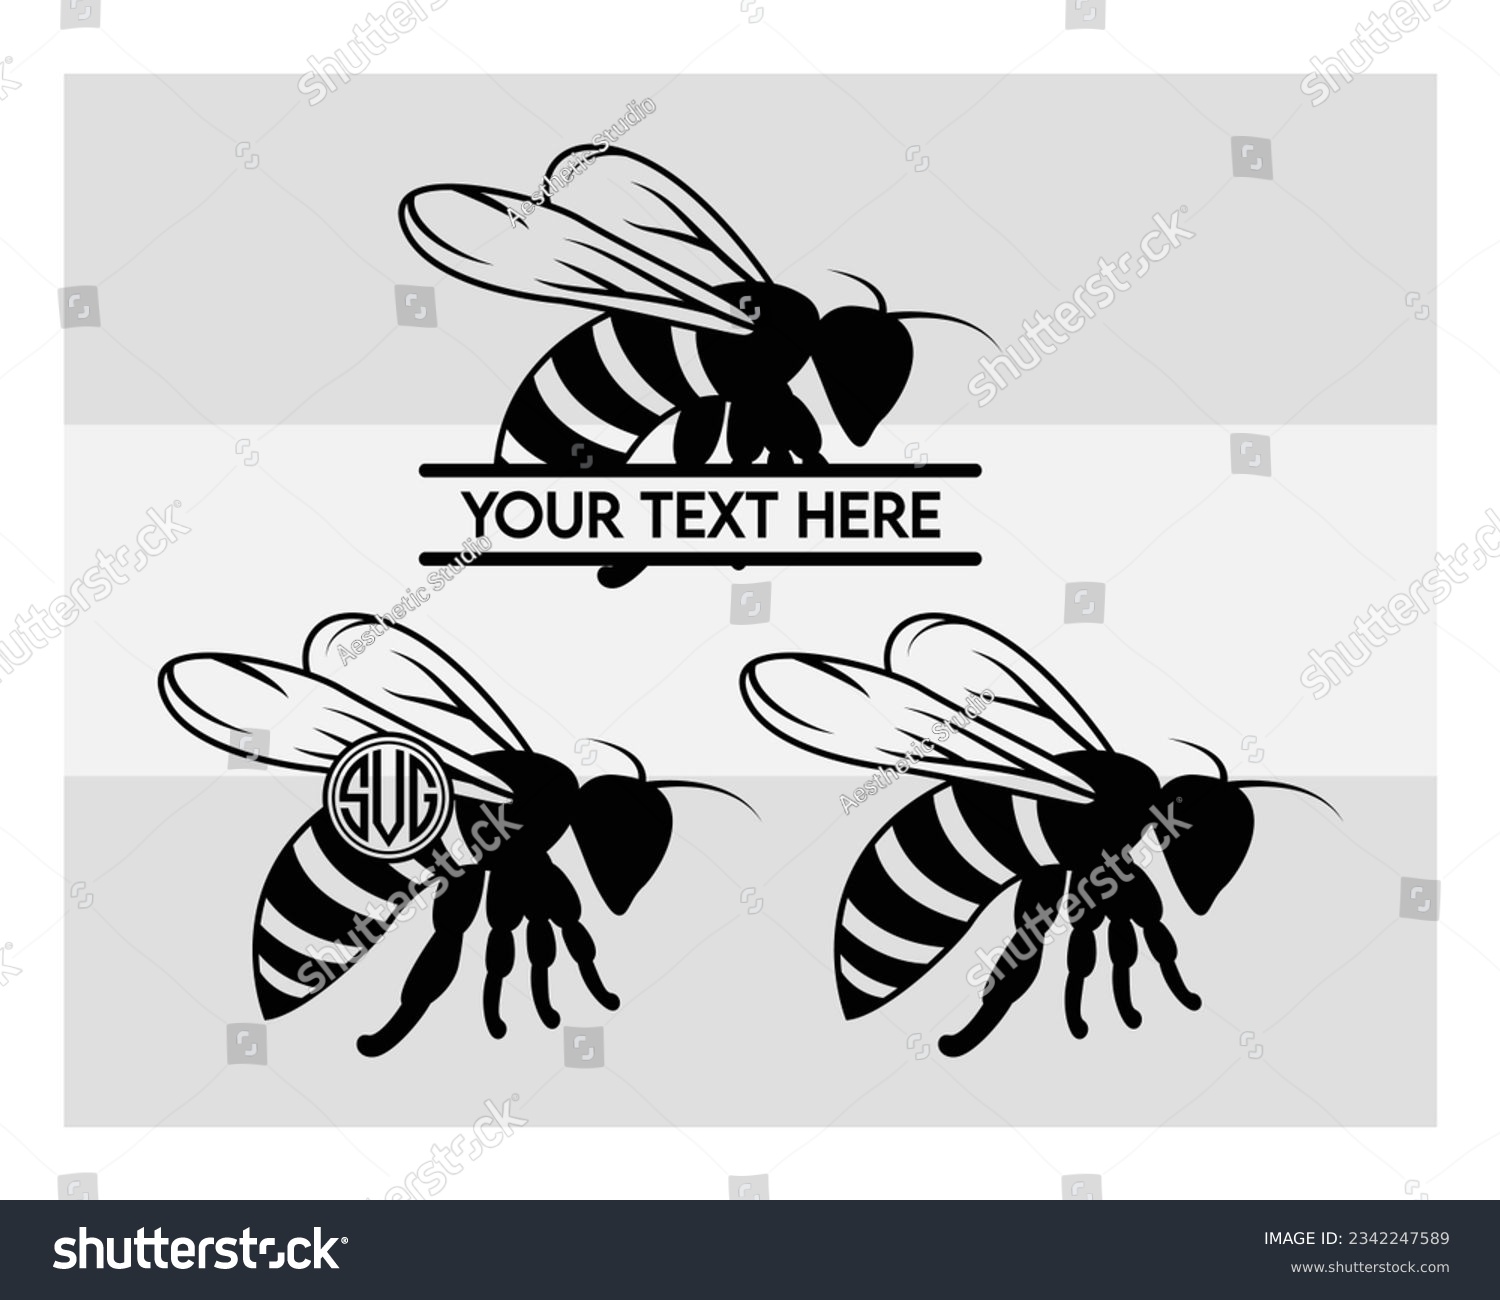 SVG of Bee, Bumble Bee Svg, Honey Bee Silhouette, Animals Svg, Circut Cut Files Silhouette, Bee Clipart Svg, Honeybee Svg, Silhouette, Vcetor, Outline, Eps, Cut file svg